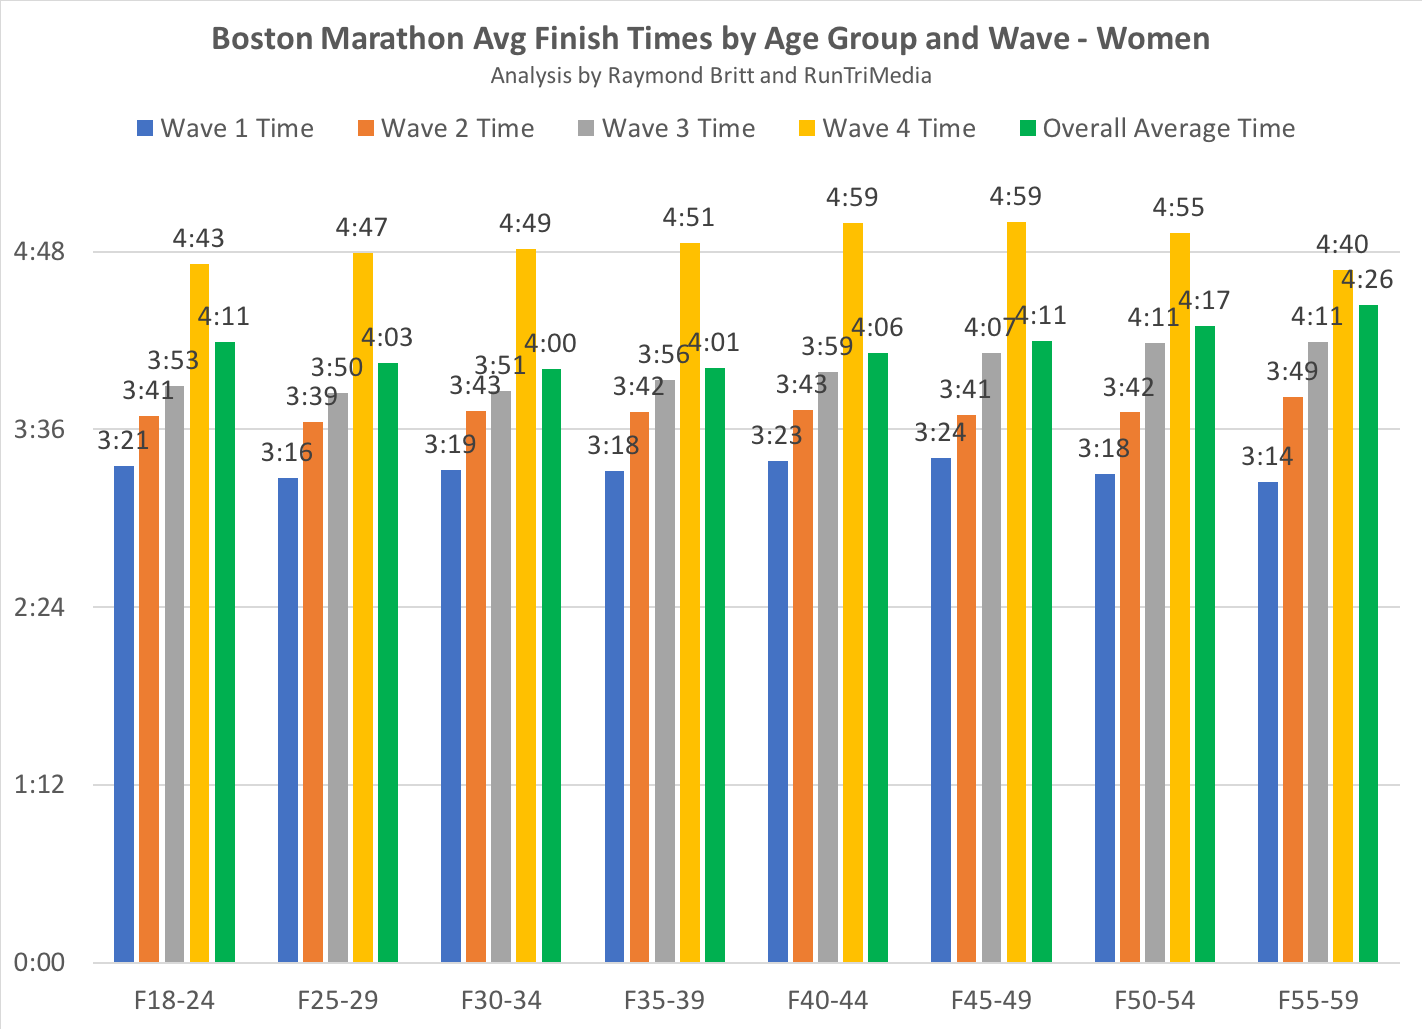 5k Times By Age Chart